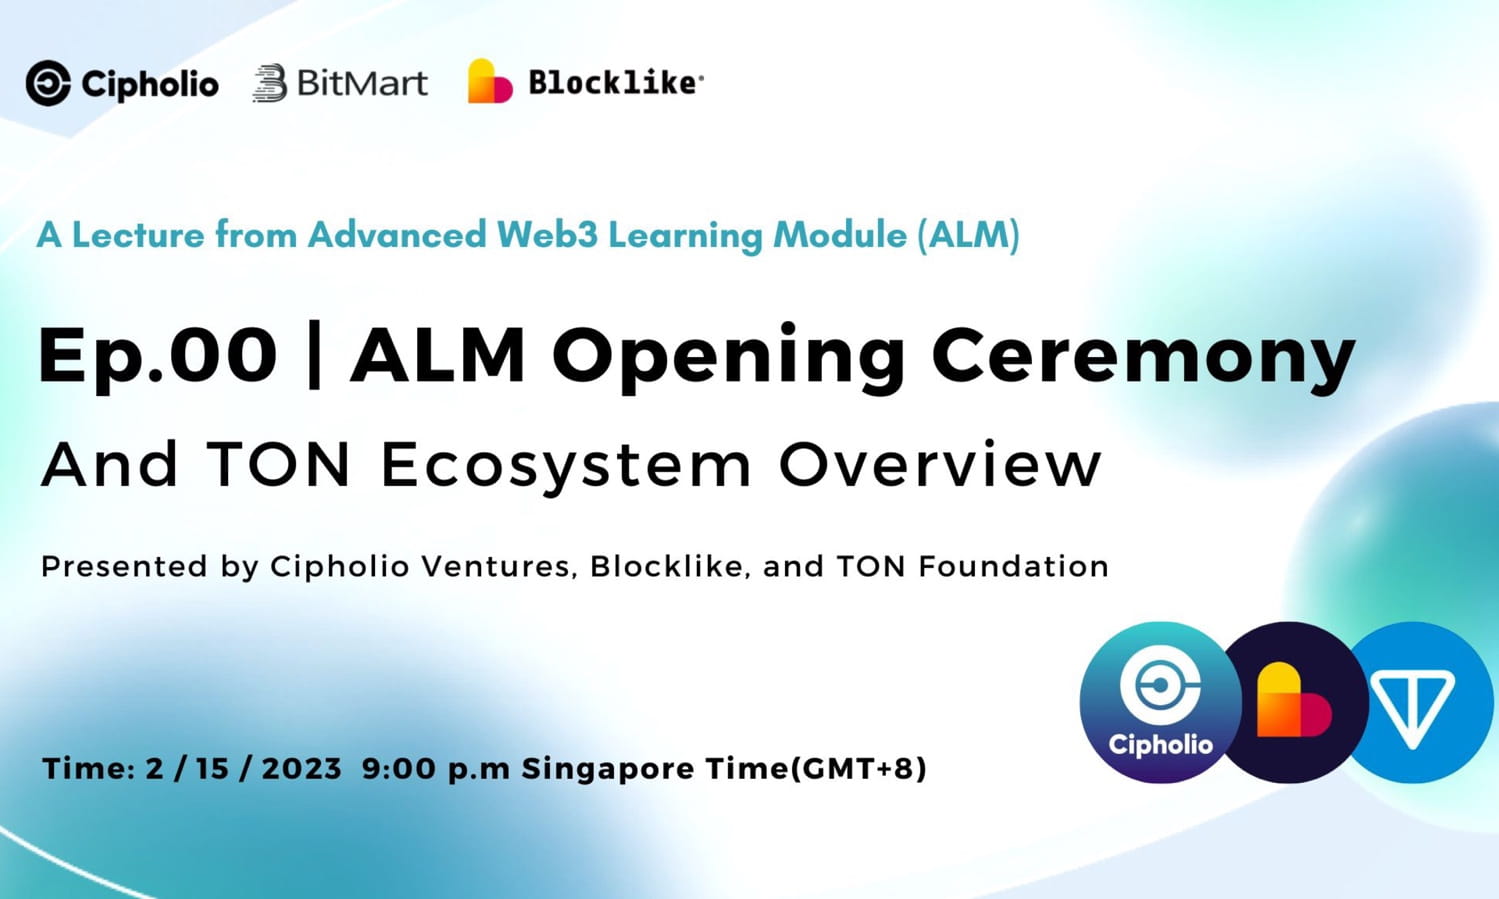 Cipholio & Blocklike ALM Openning Ceremony